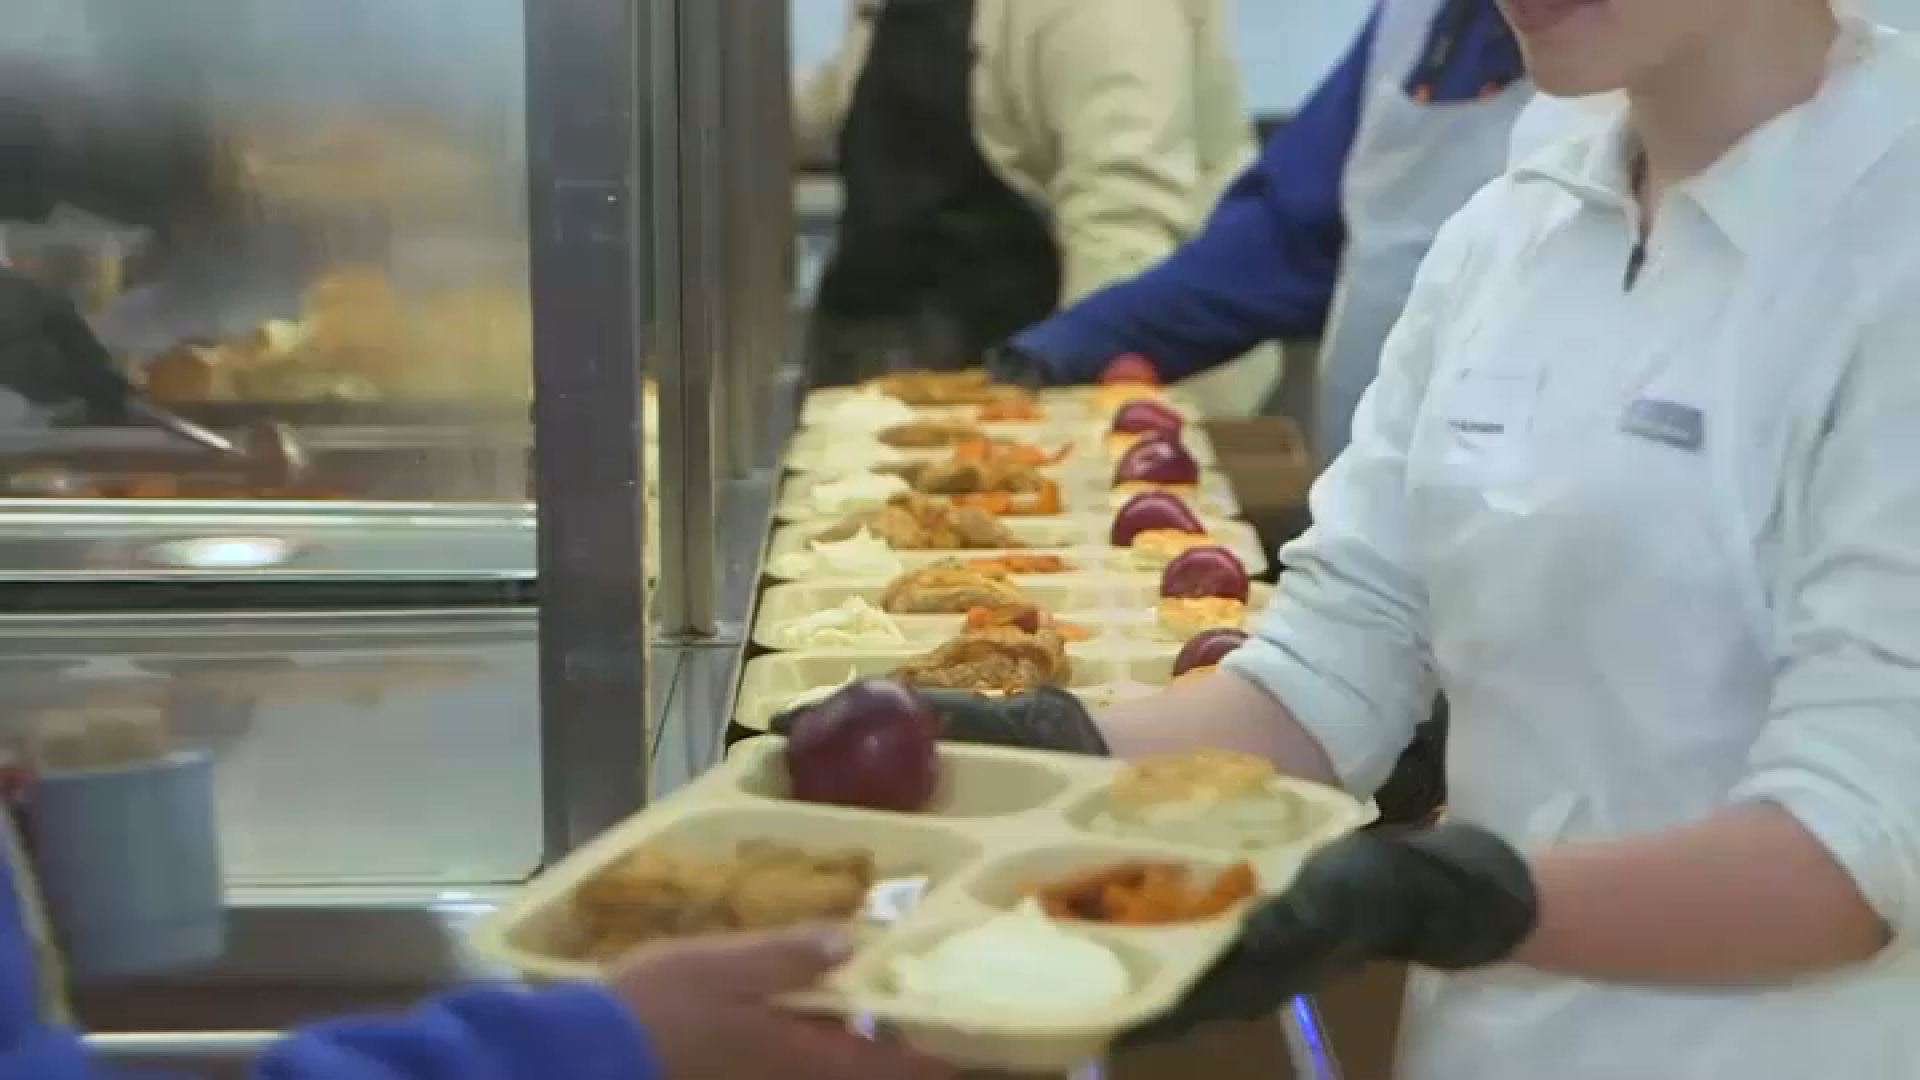 Glide Prepares Thousands Of Meals For